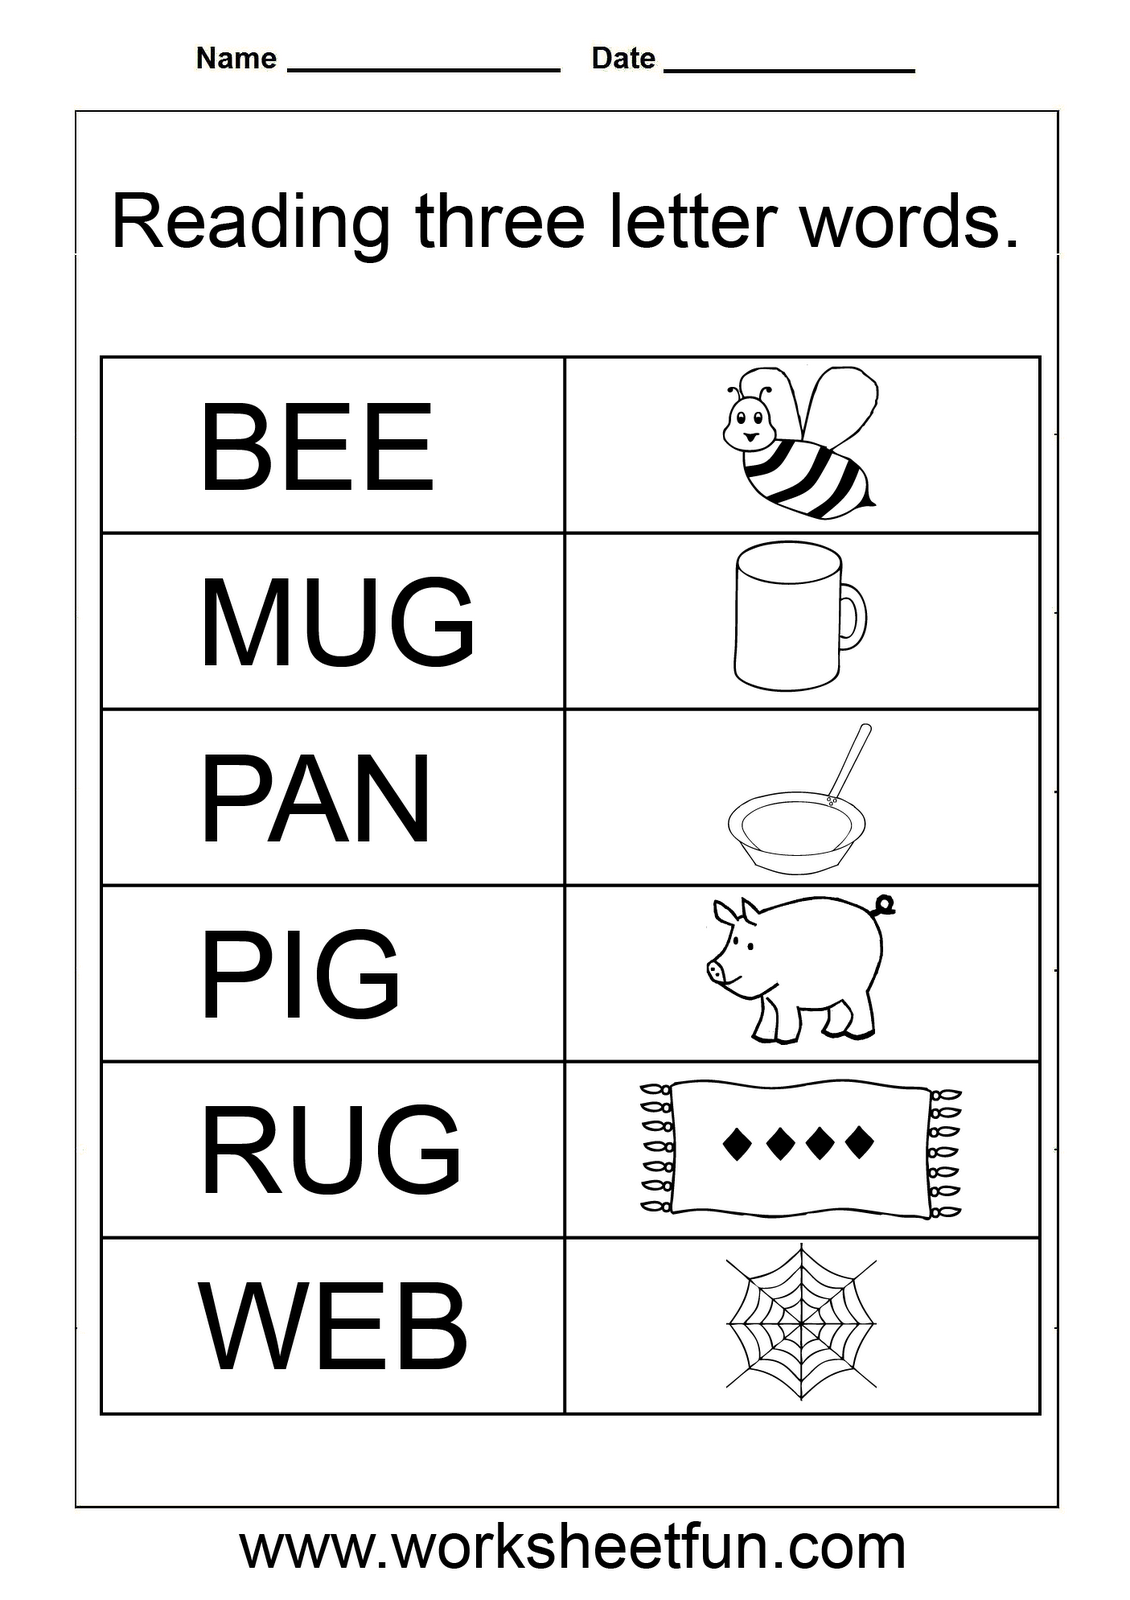 tracing-three-letter-words-worksheets-tracinglettersworksheets-letter-tracing-worksheets